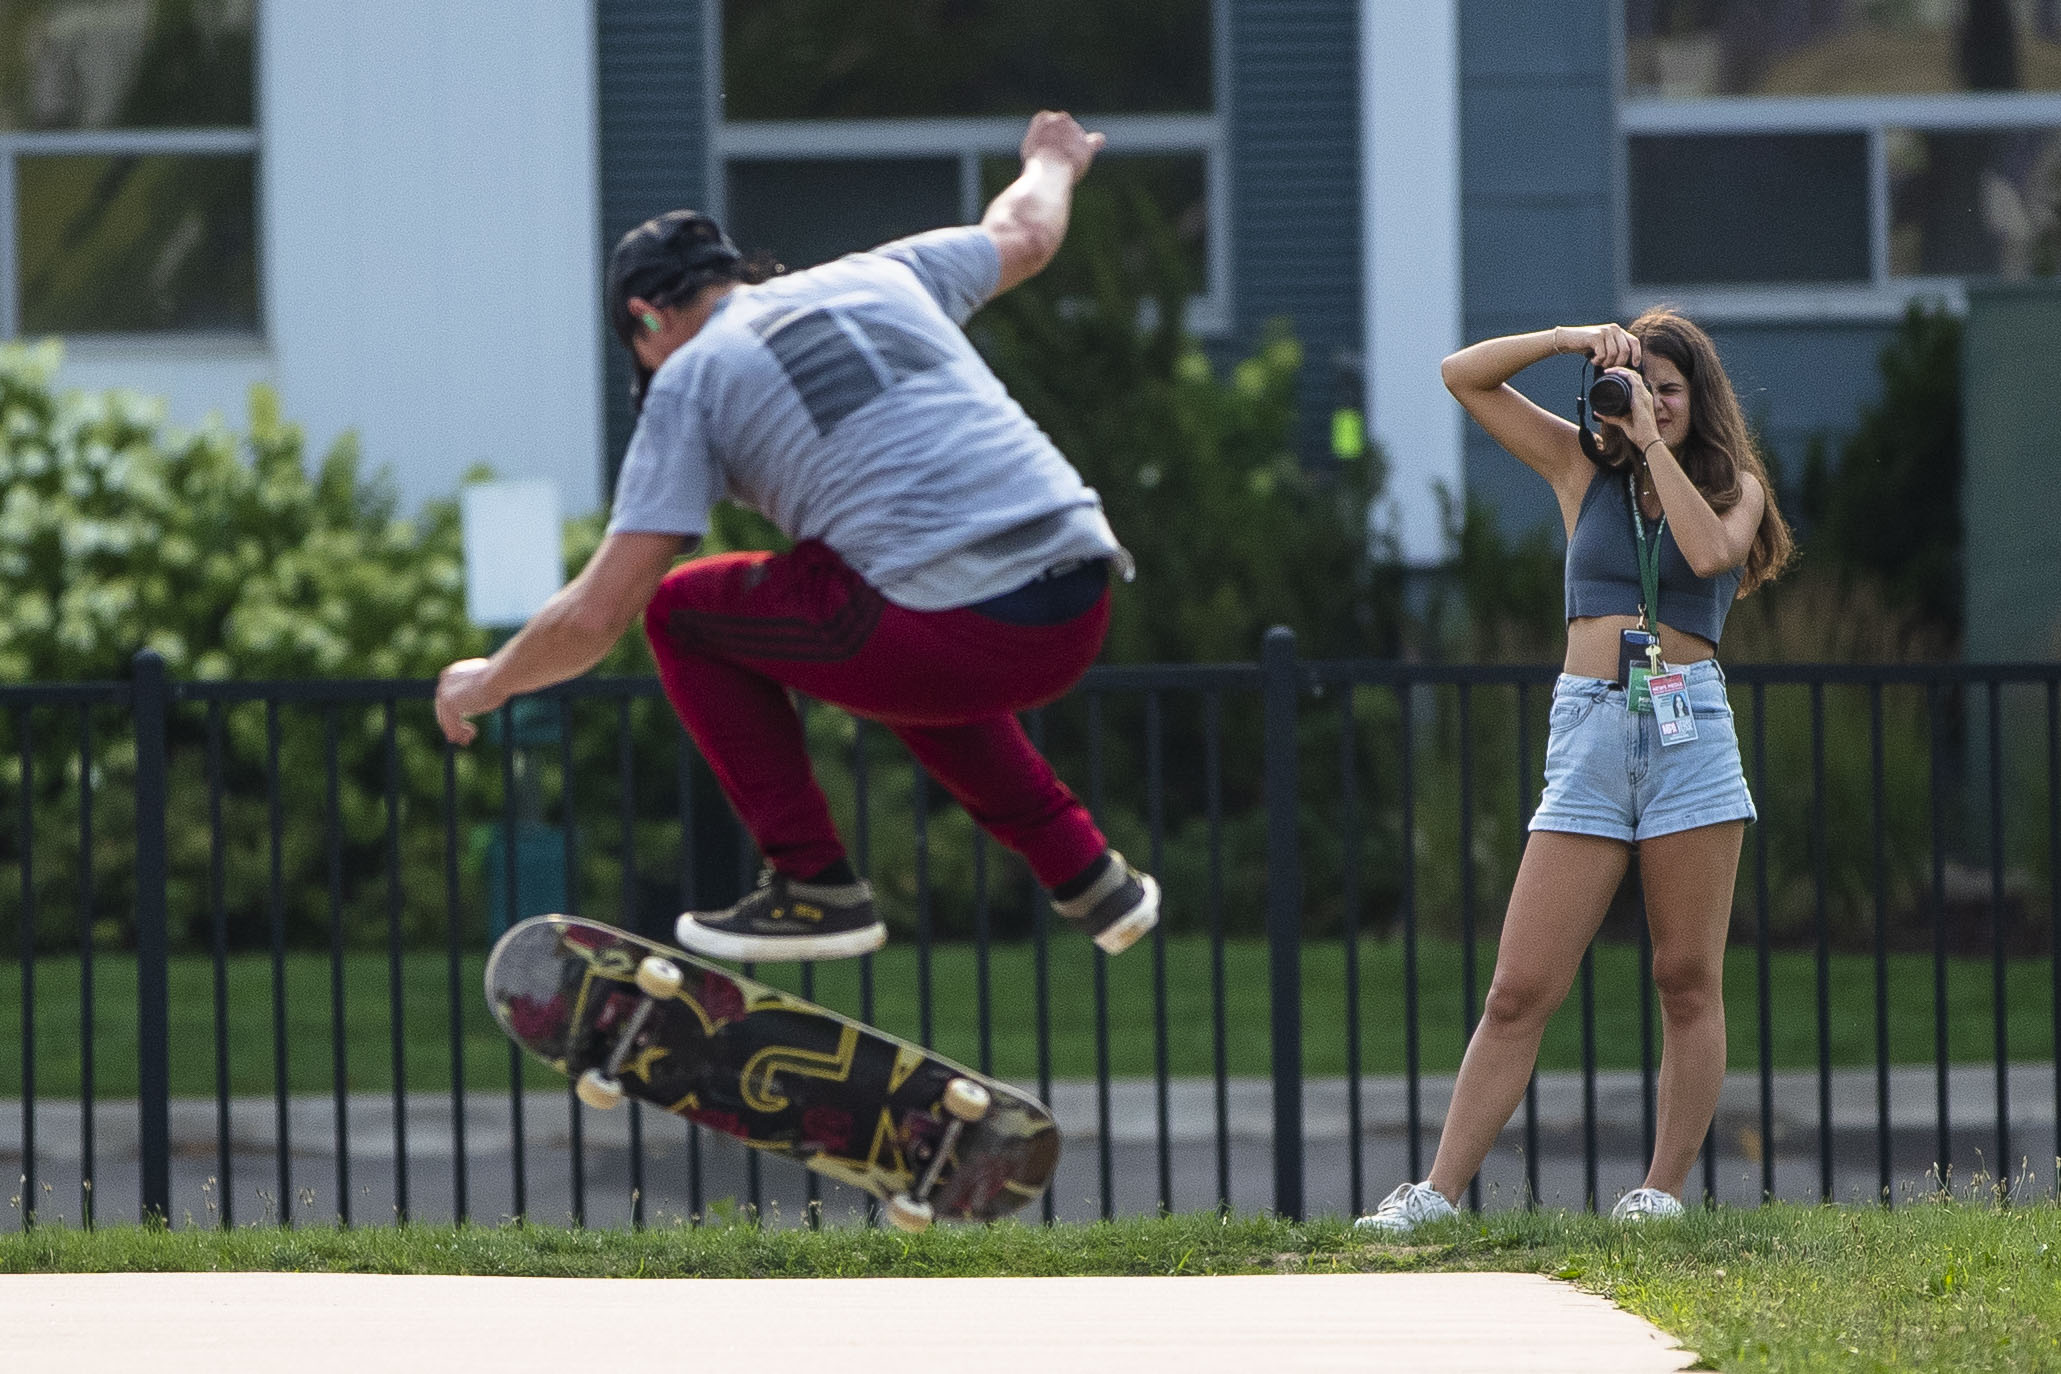 A skateboarder does a trick in the air while a student photographer takes their photo.